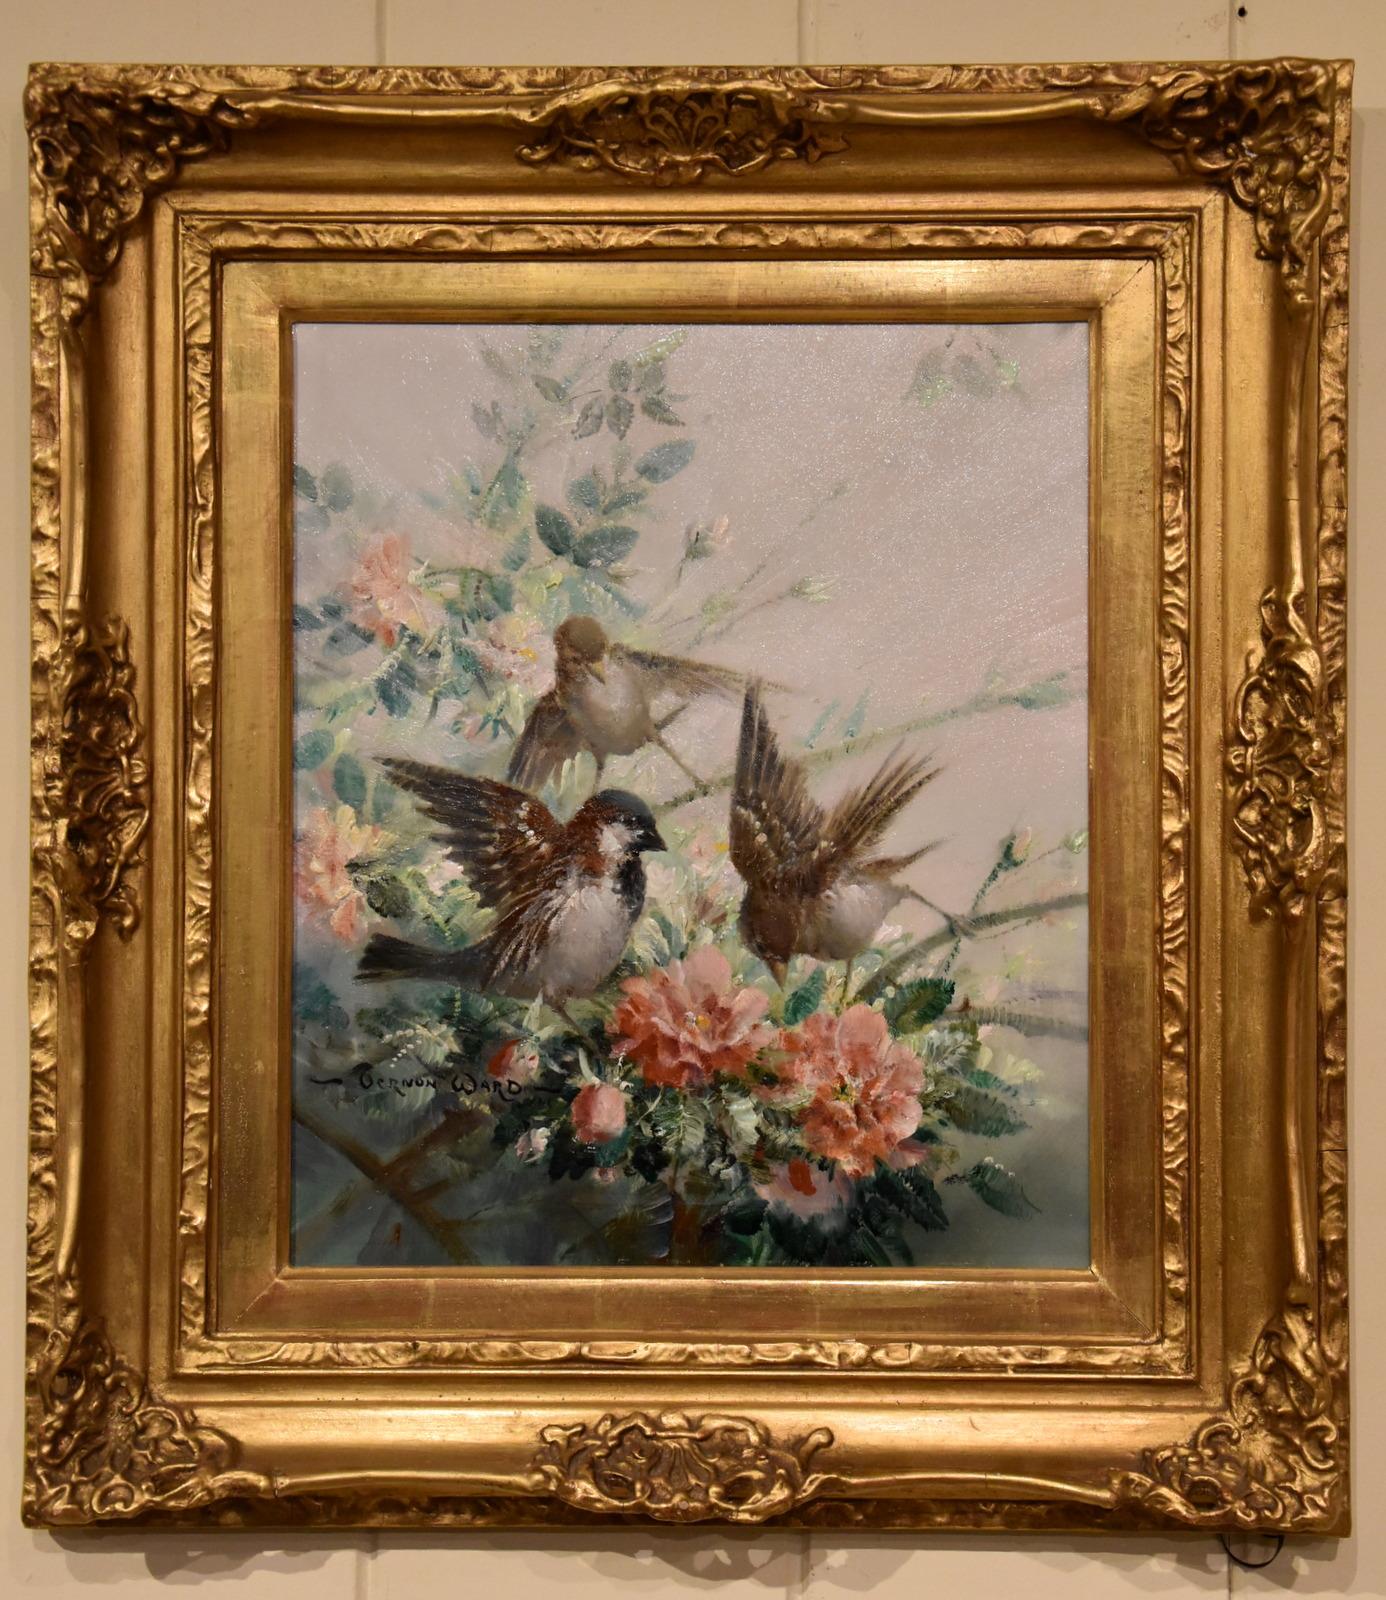 Oil Painting By Vernon de Beauvoir Ward “Sparrow and Spring Blossom